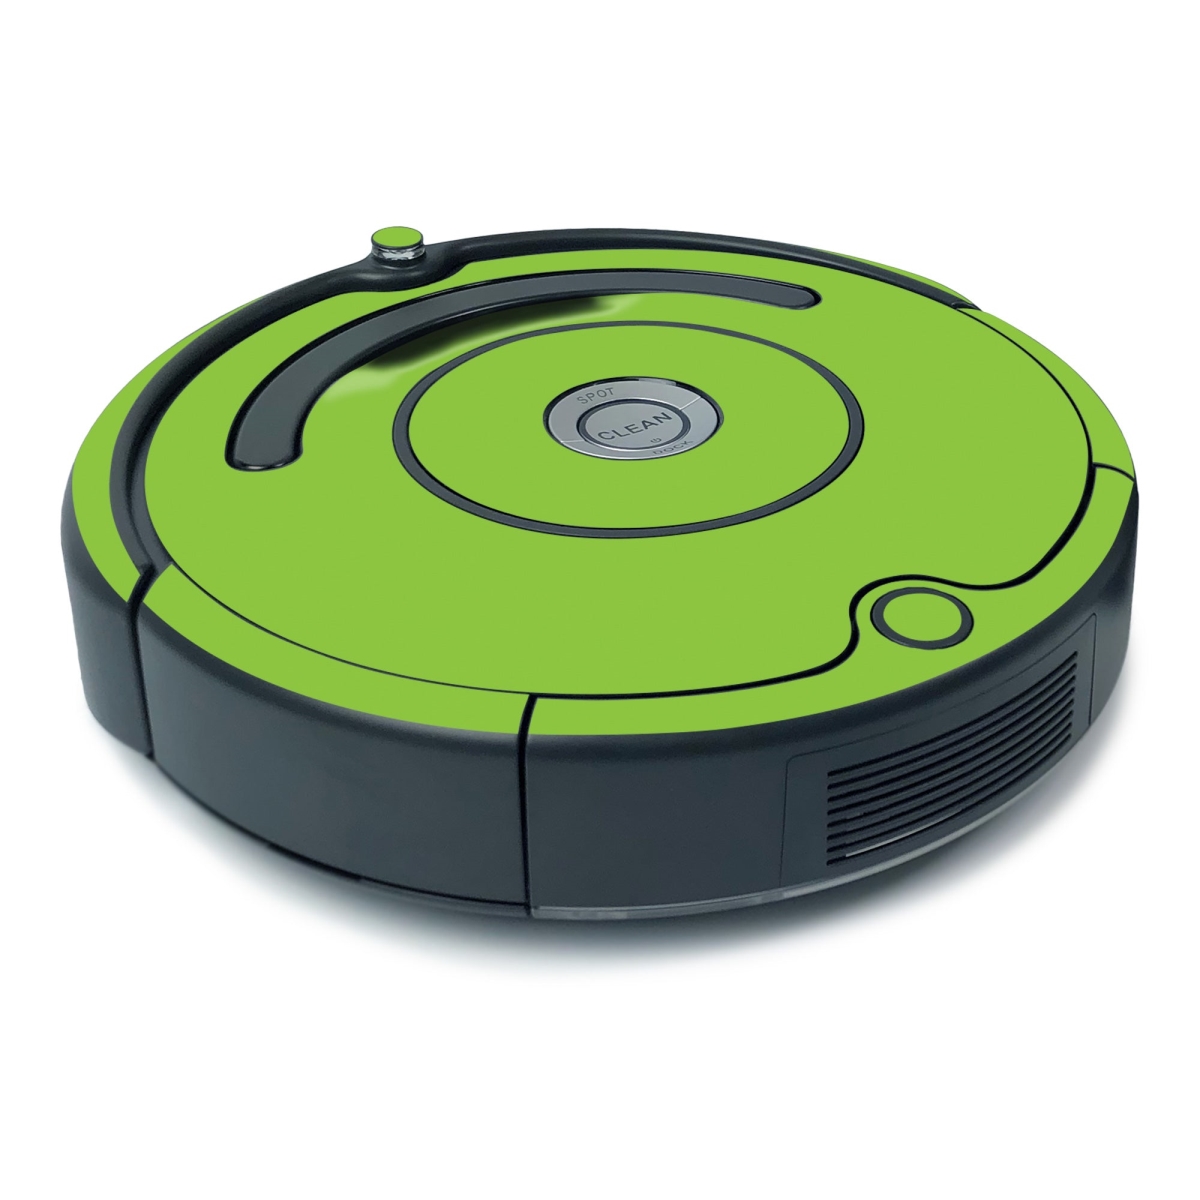 Picture of MightySkins IRRO675MIN-Solid Lime Green Skin for iRobot Roomba 675 Minimal Coverage - Solid Lime Green